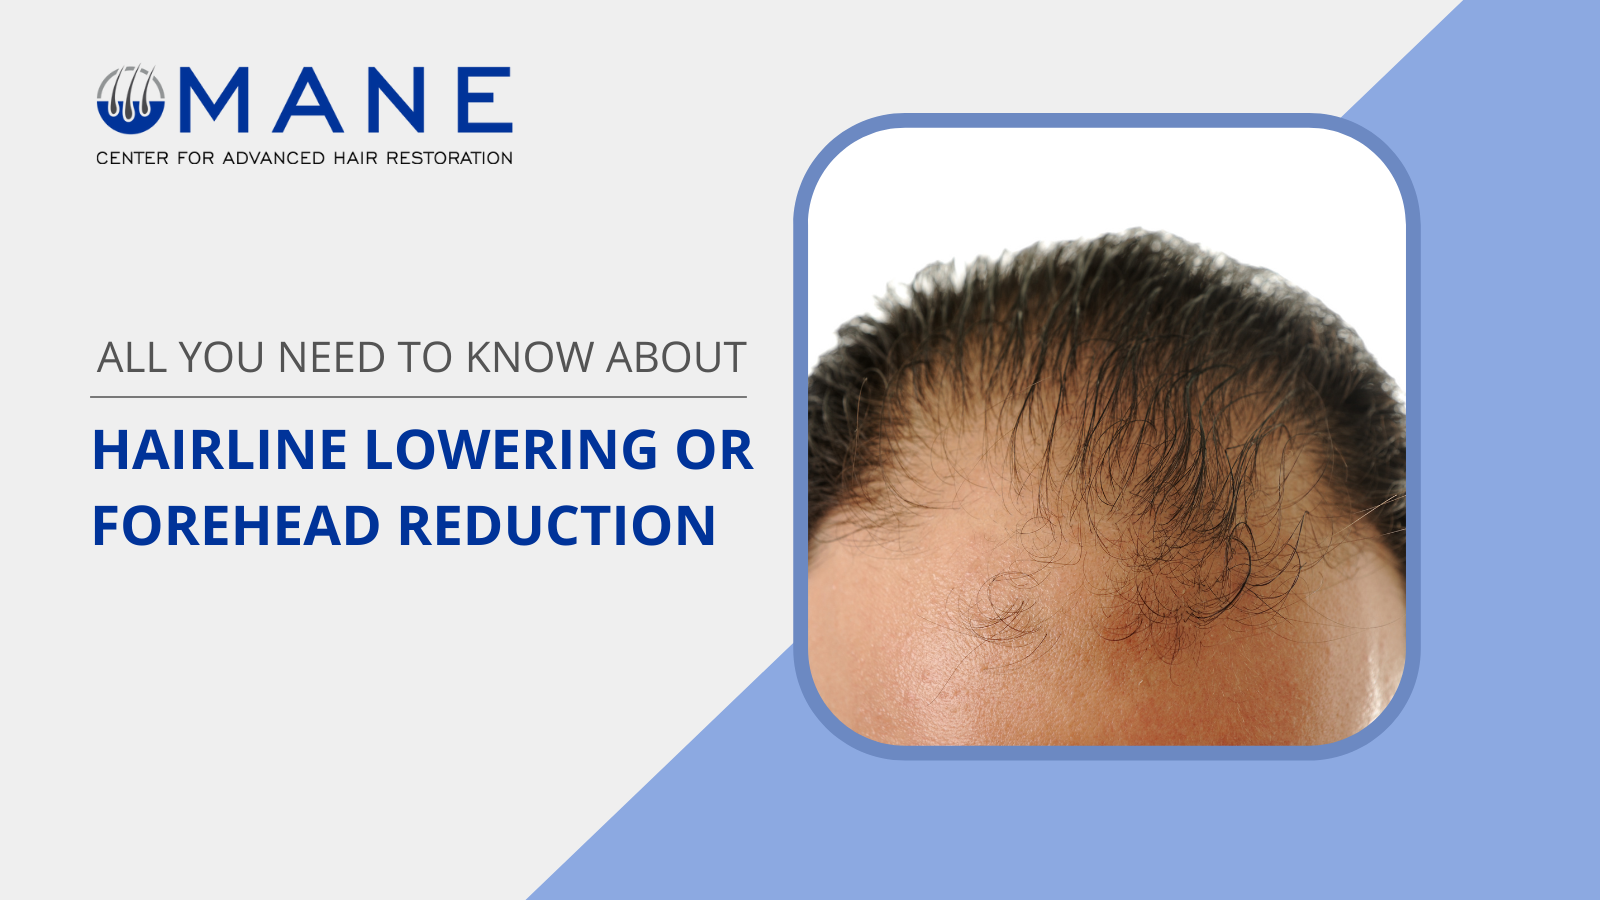 All You Need to Know about Hairline Lowering or Forehead Reduction